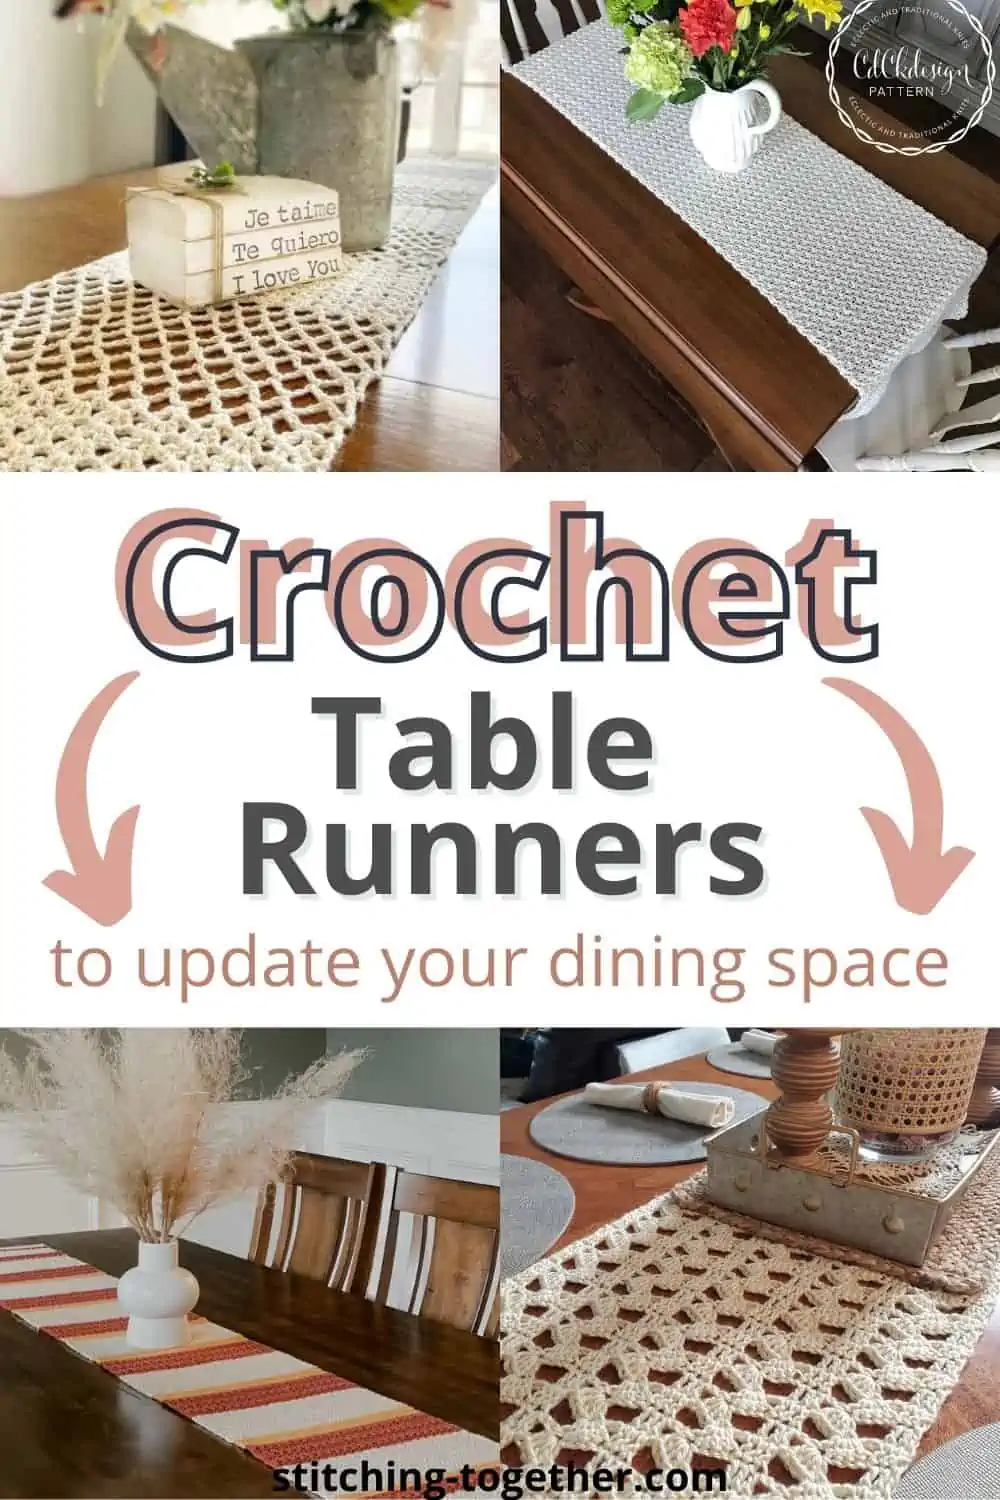 collage of table runners with words reading, "crochet table runners to update your dining space"